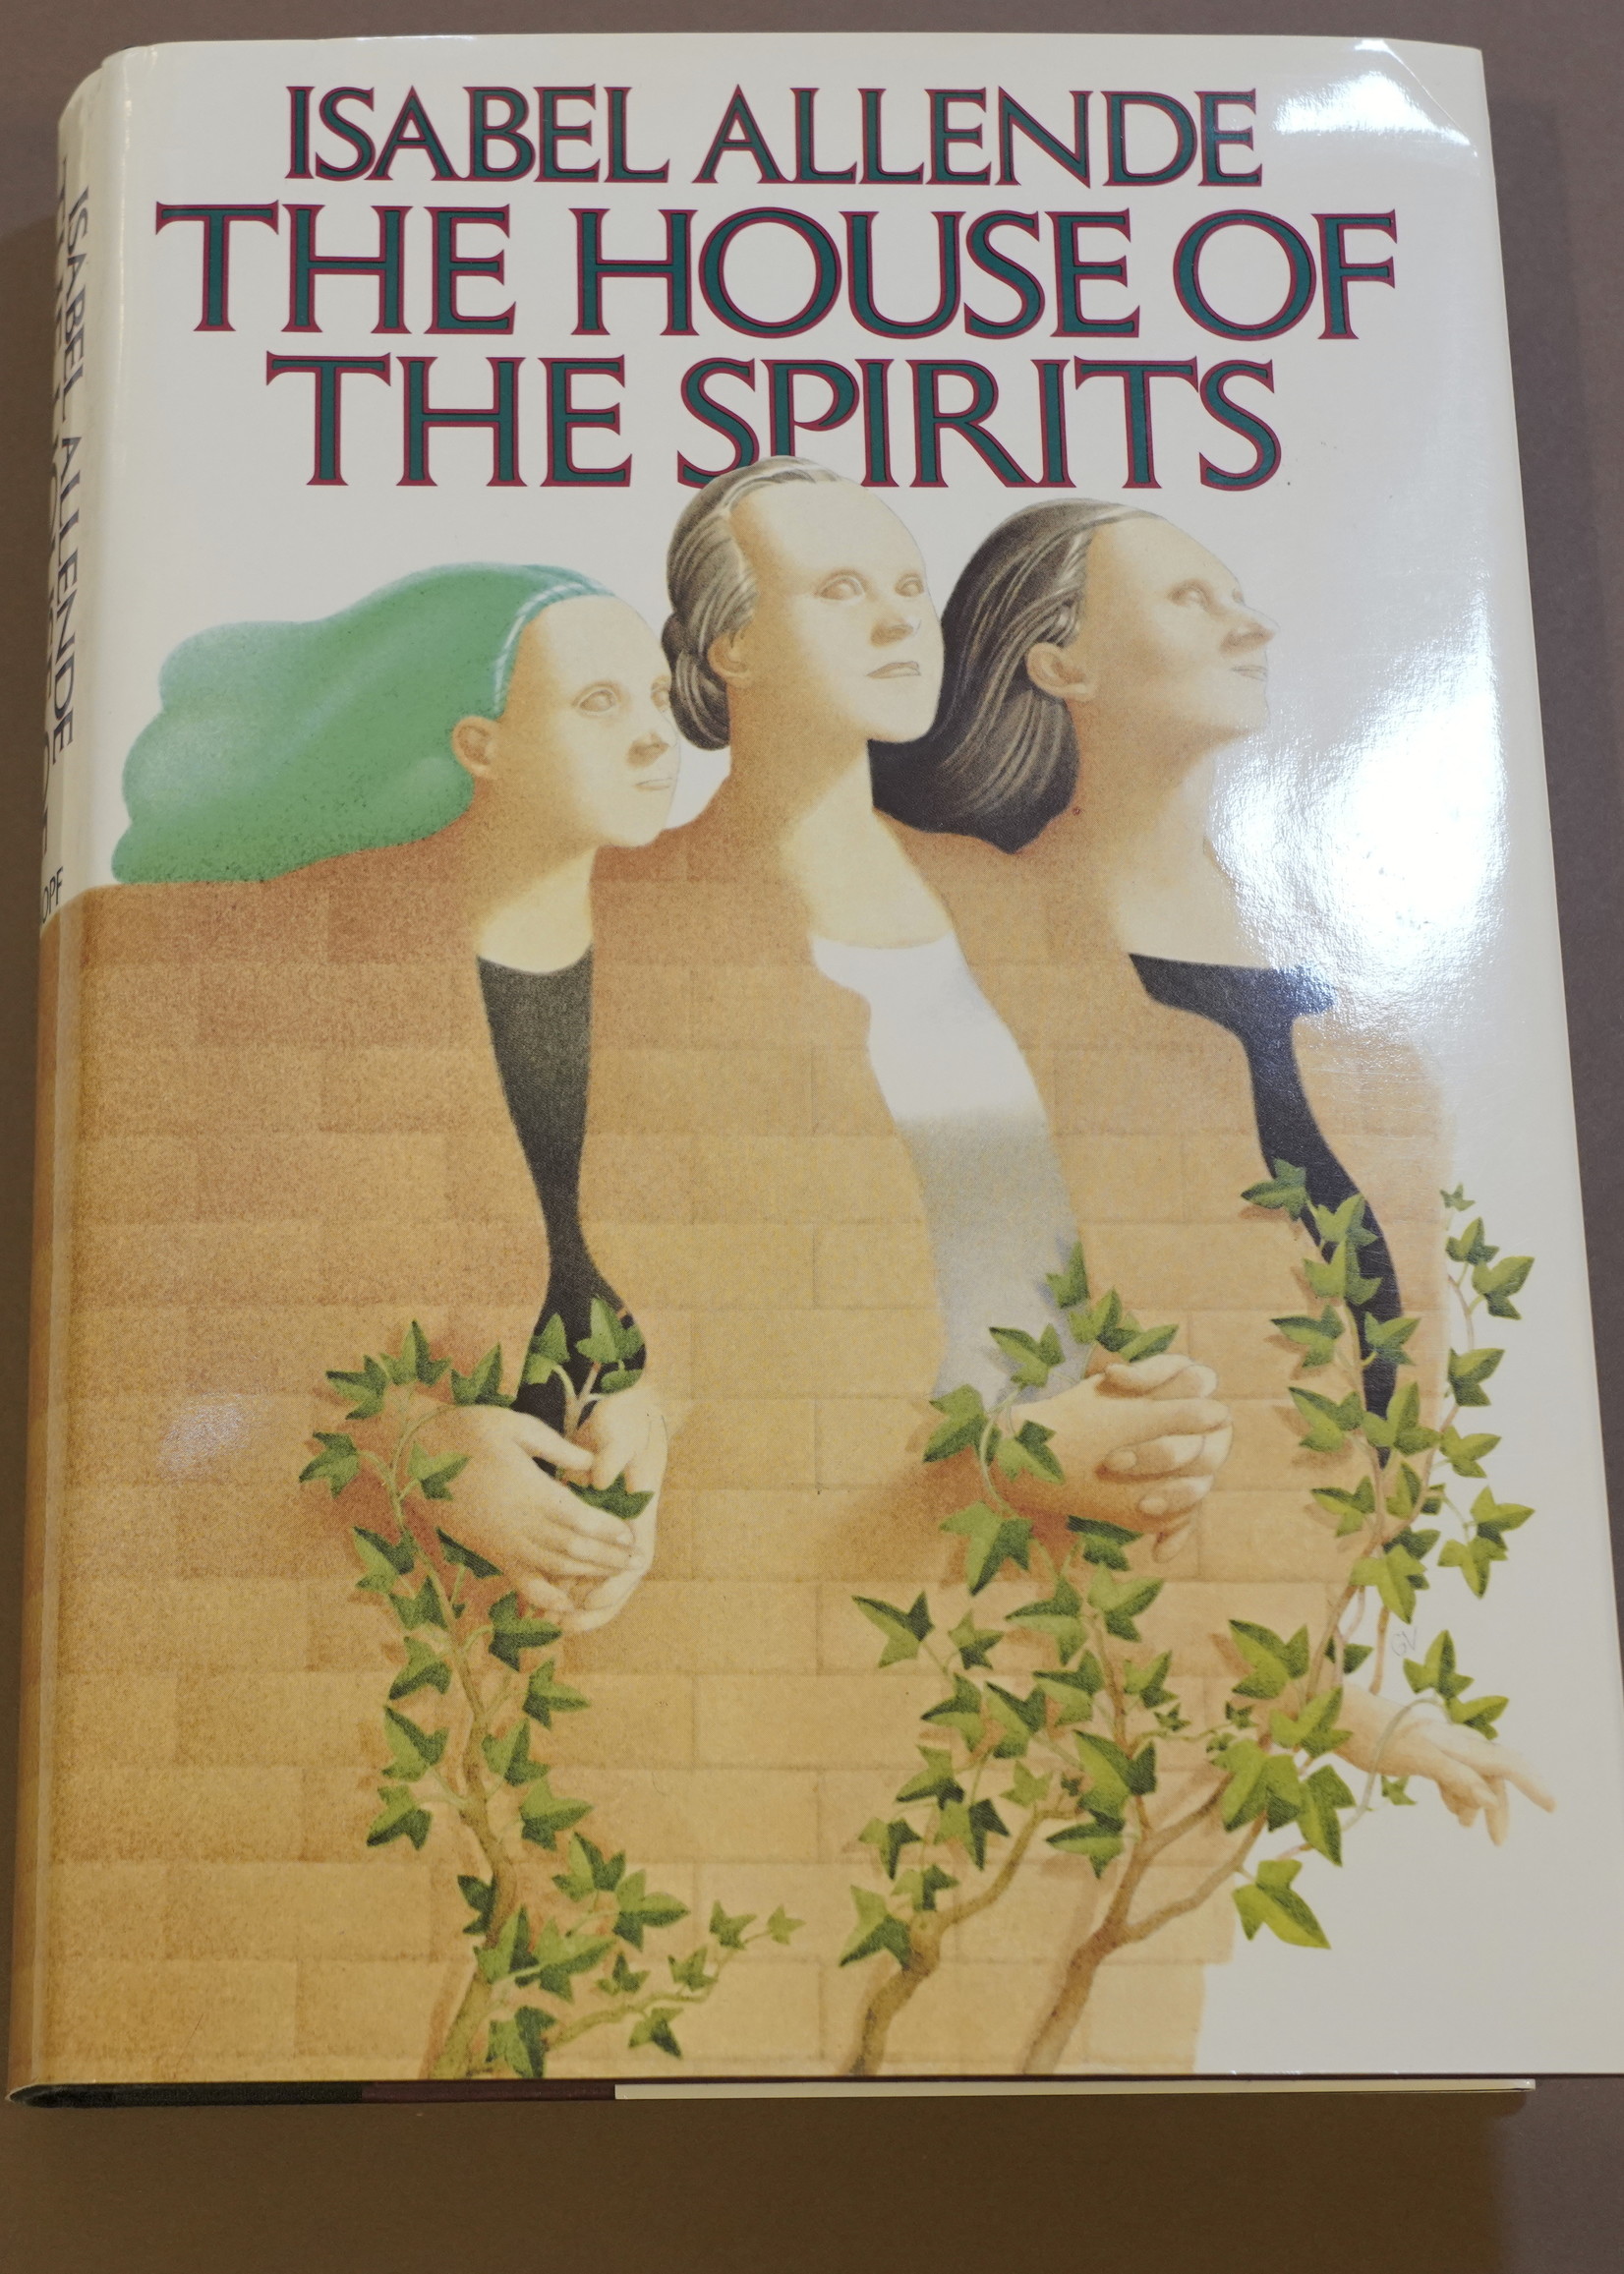 The House of Spirits